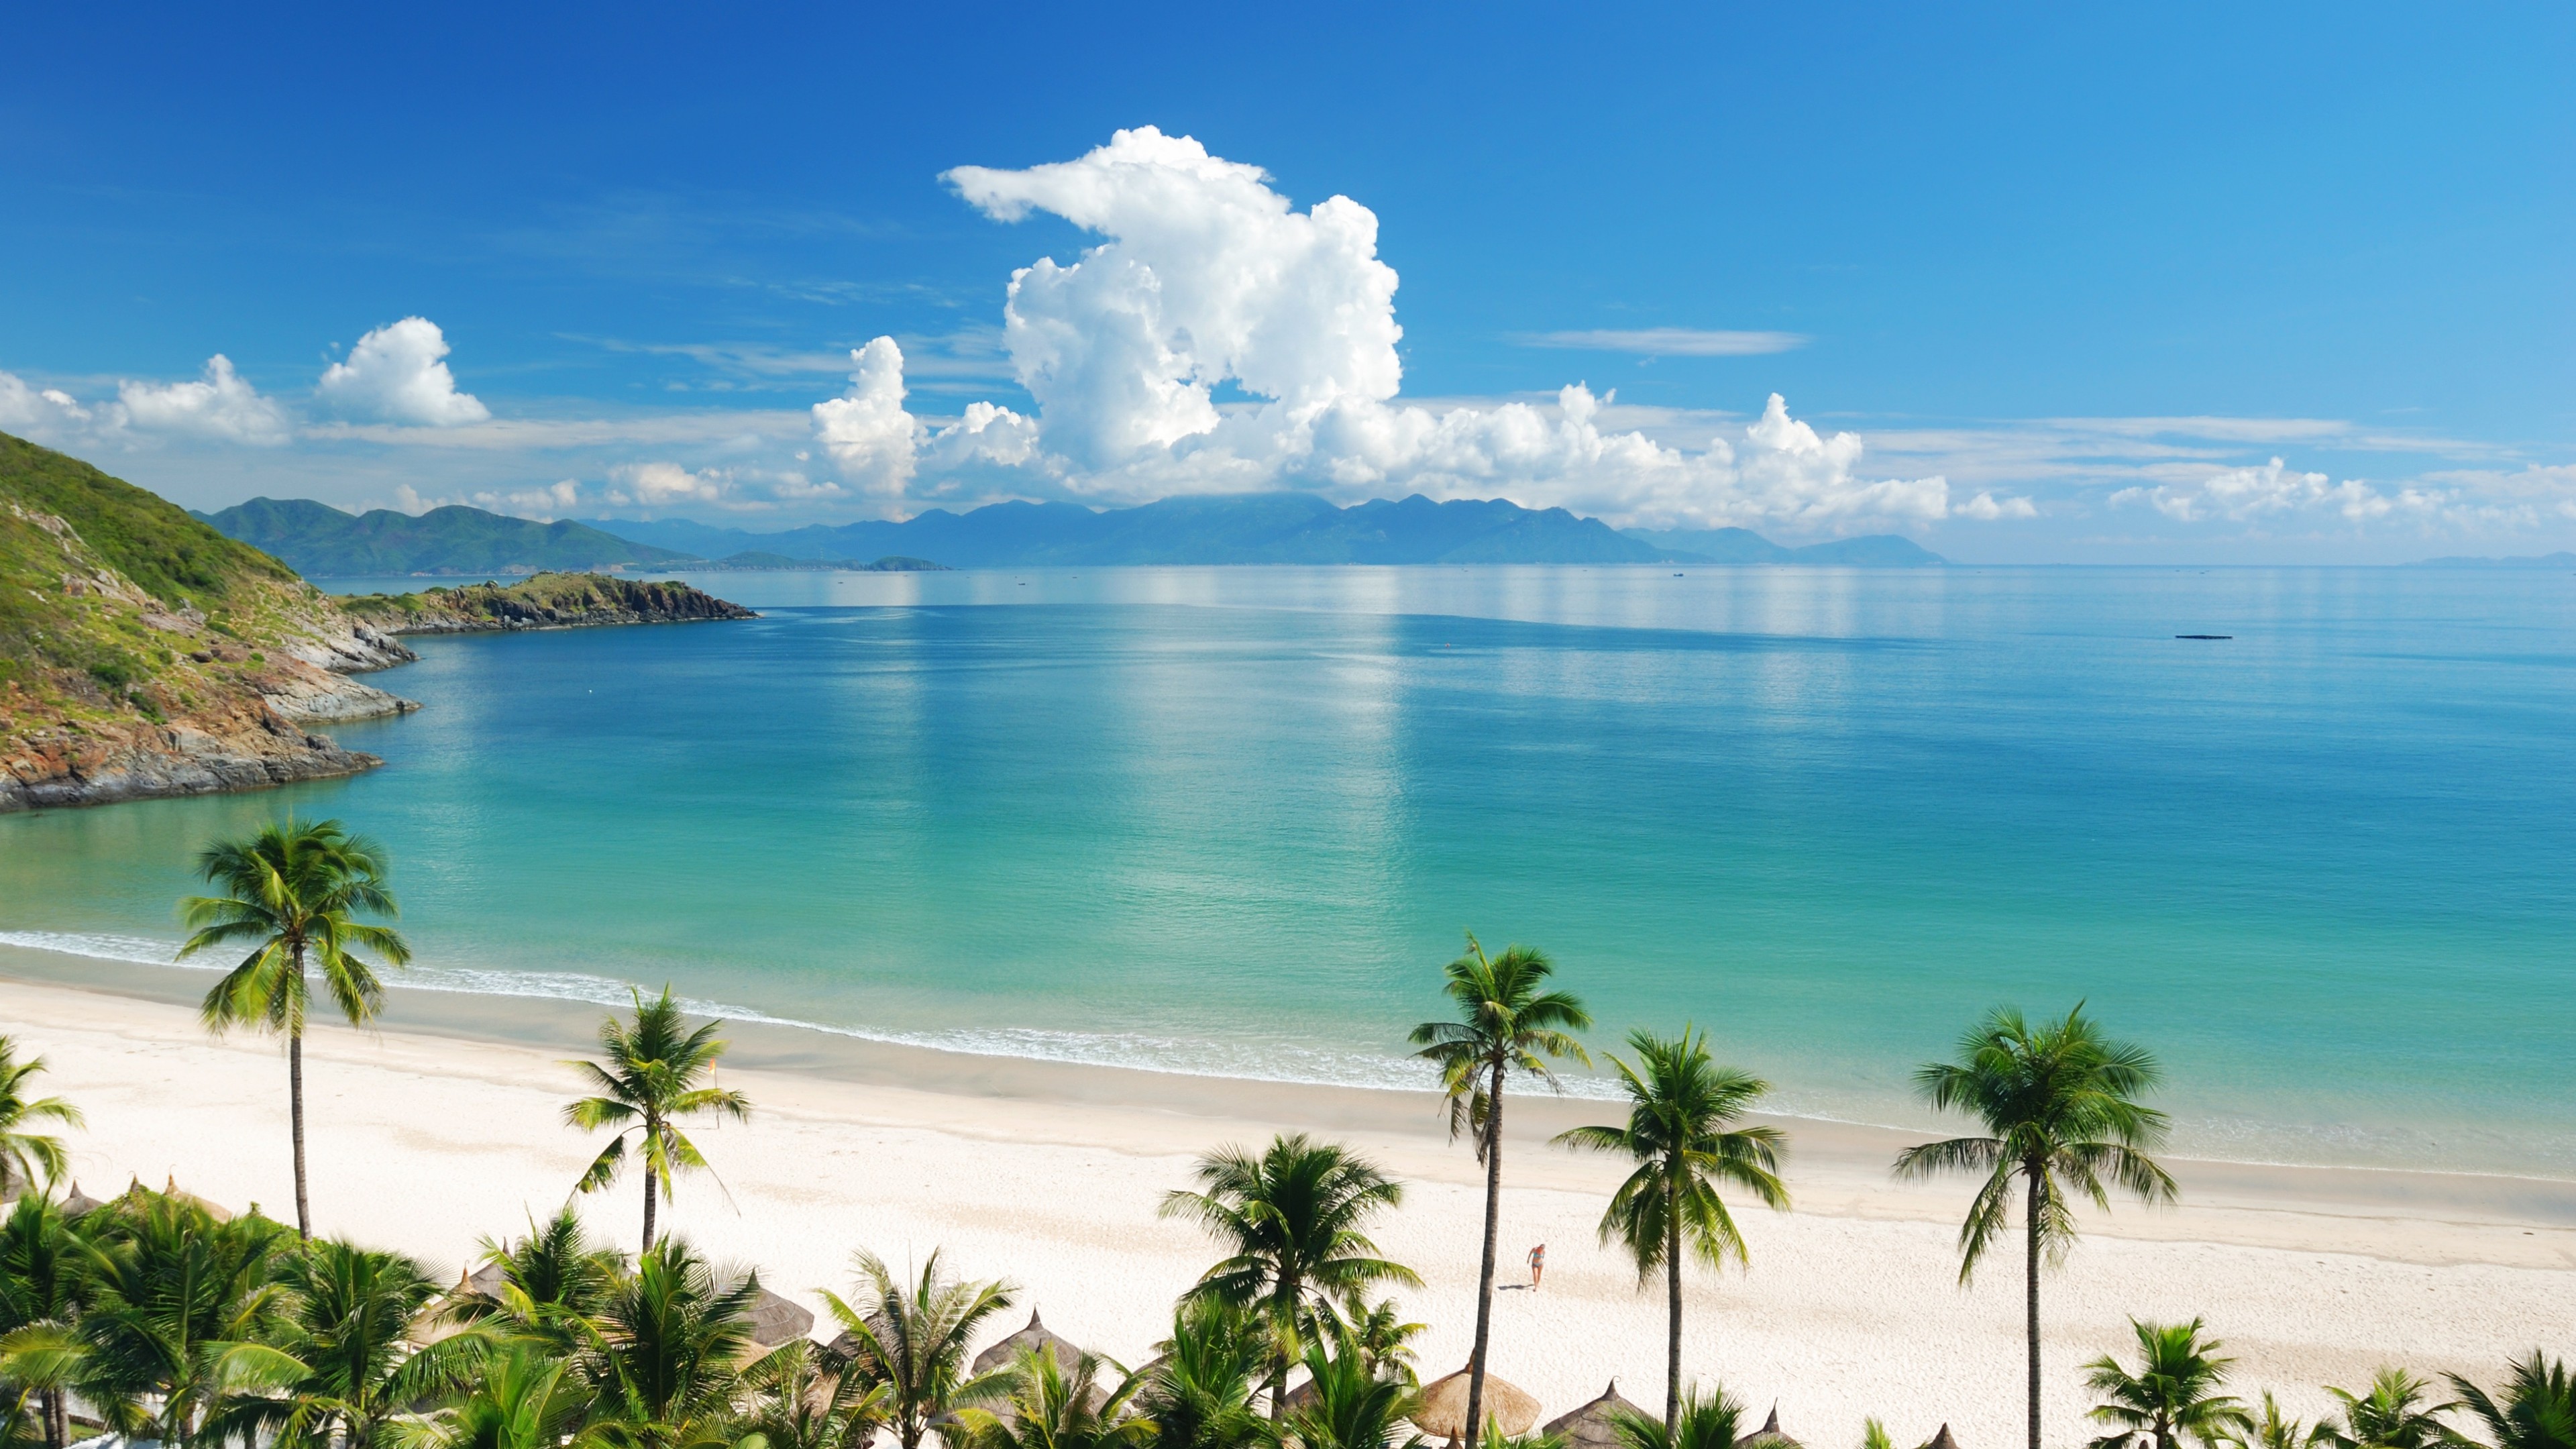 3840x2160 Awesome Panoramic Beach View Wallpaper Wallpaper